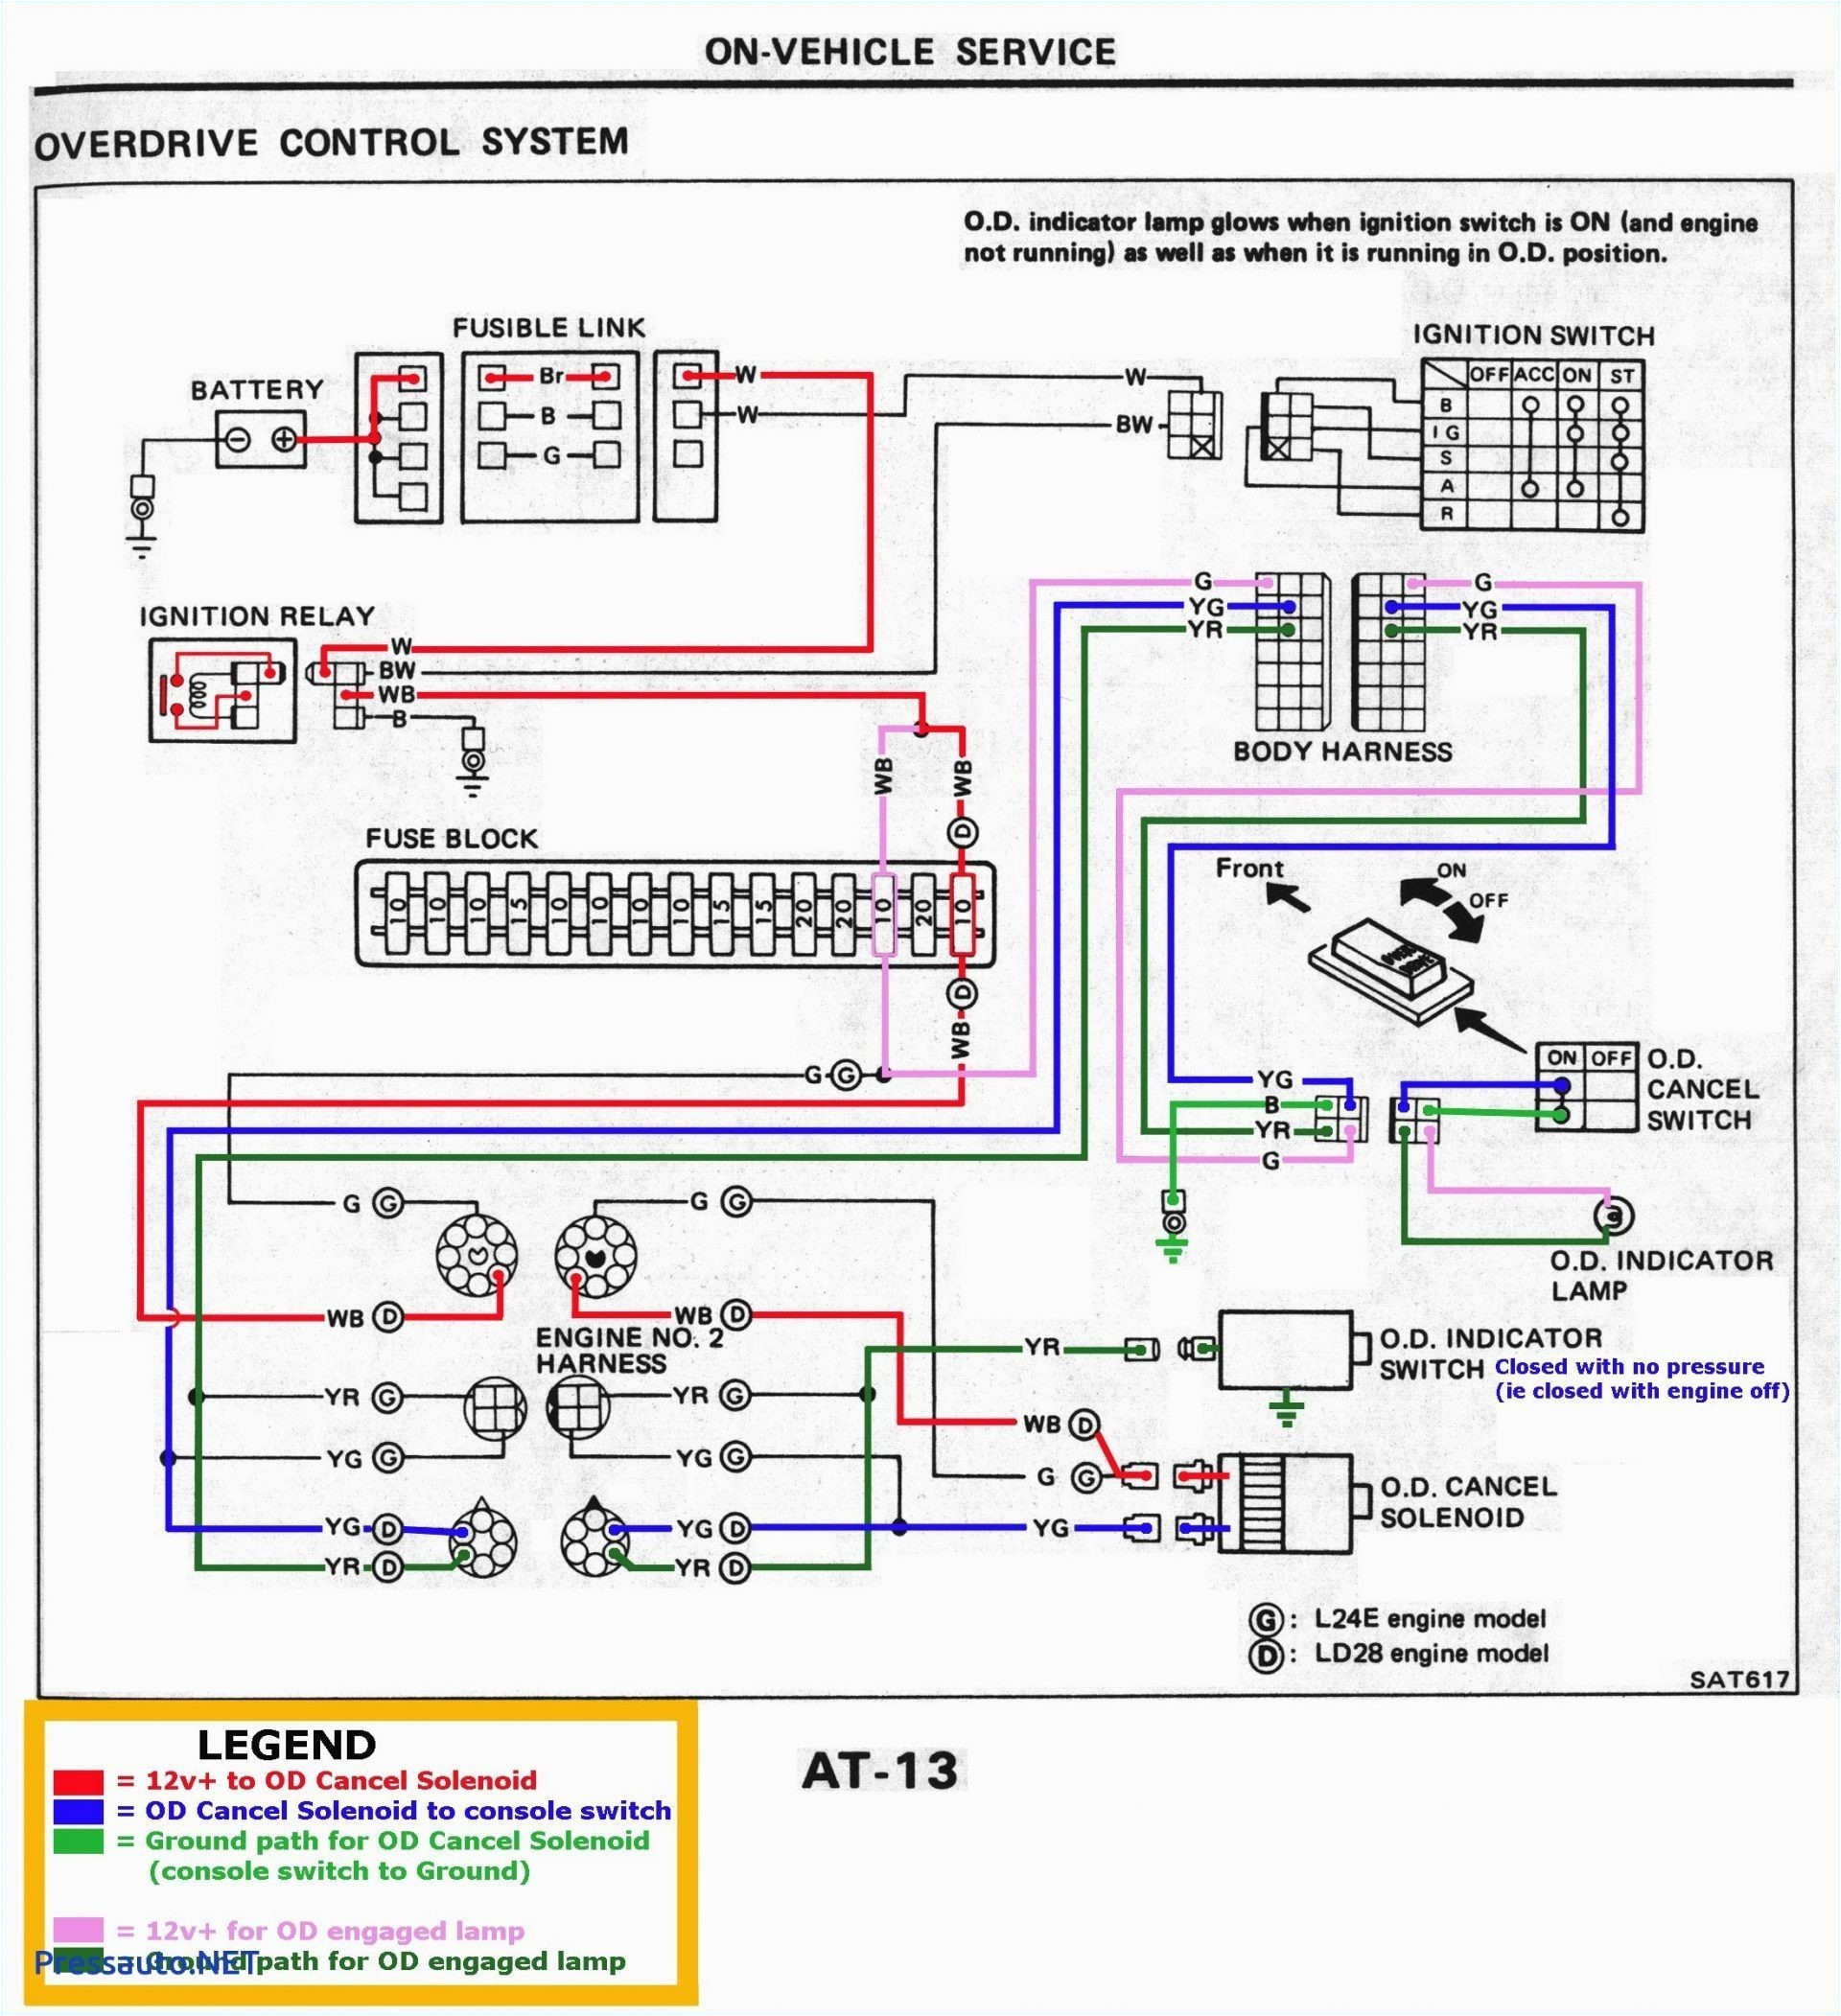 2010 dodge ram 1500 4wd wiring diagram wiring diagrams terms 2010 dodge ram 1500 light switch wire diagram